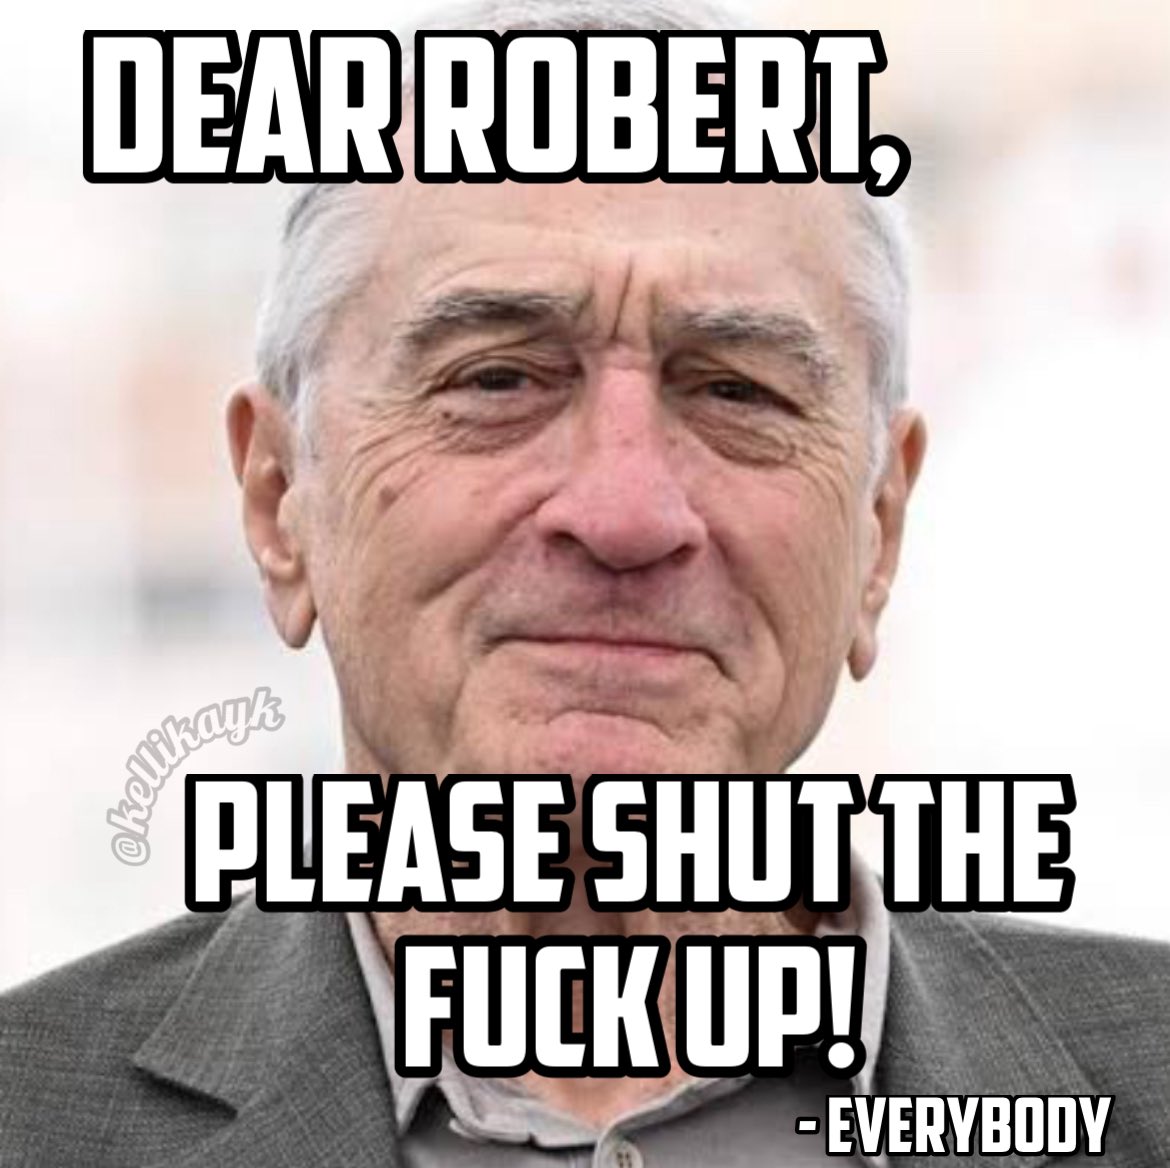 Robert DeNiro said Trump’s slogan should be “fuck America” and his supporters are filled with hate 🧐 Who wants Robert to shut the fuck up? 😂😂